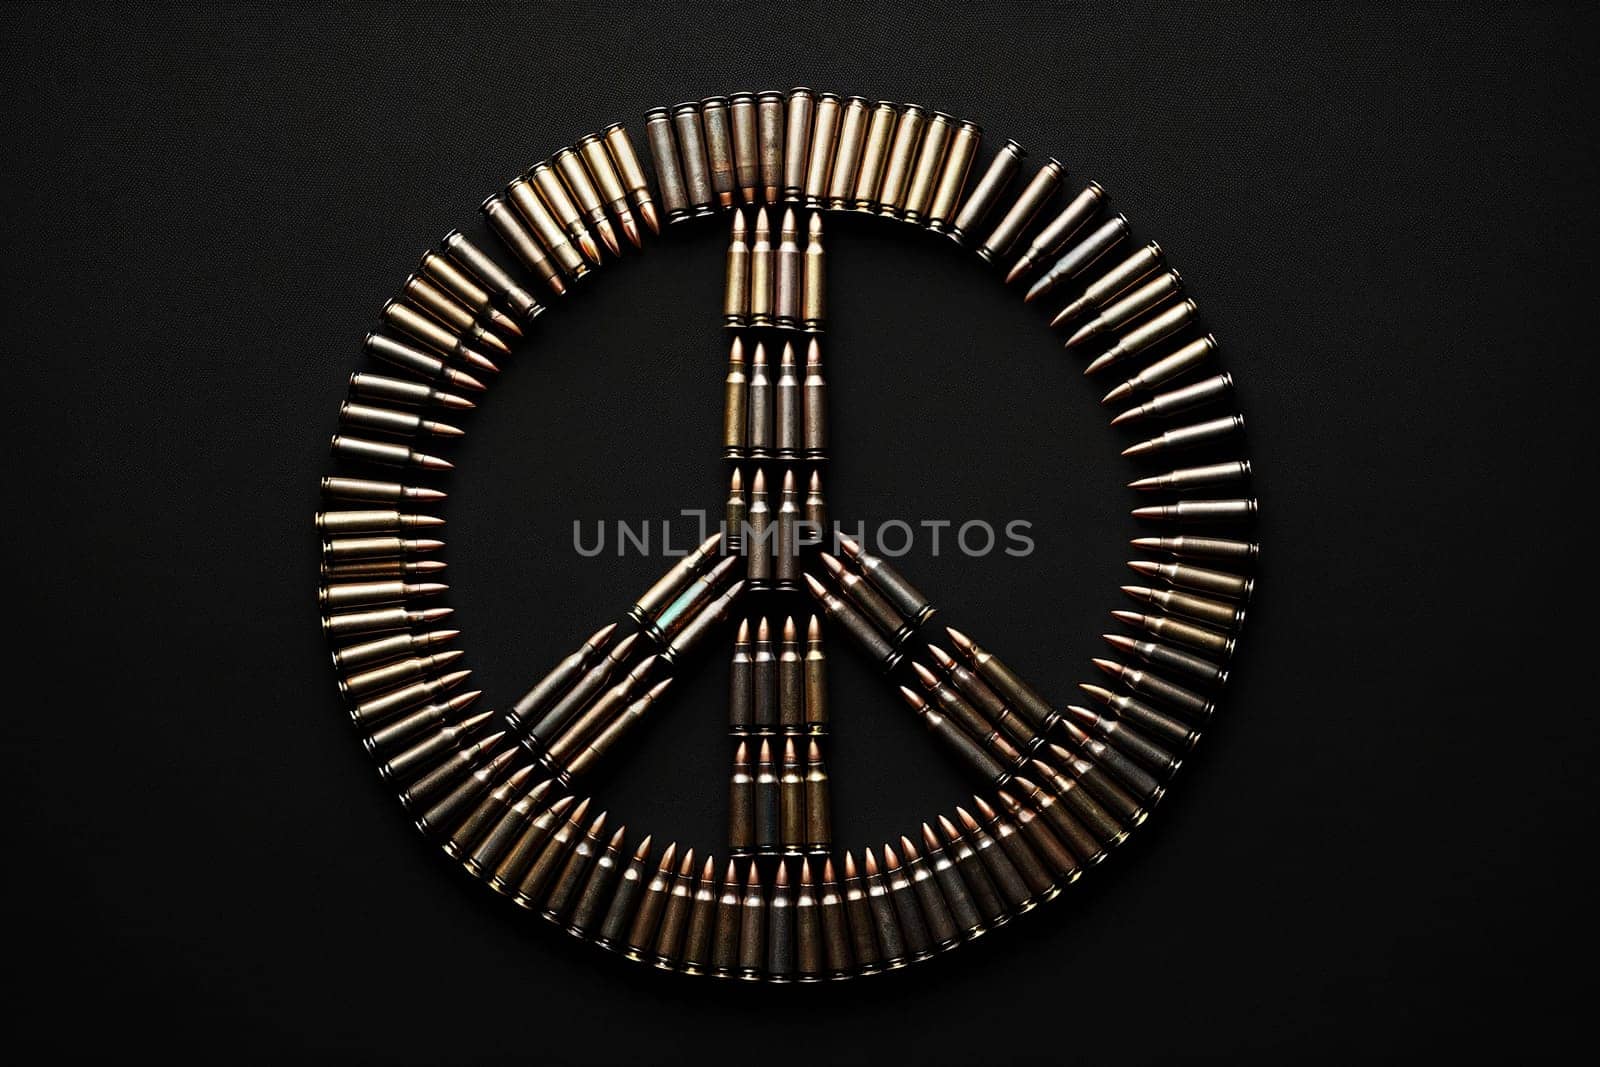 pacifist sign made from cartridges on a black background.